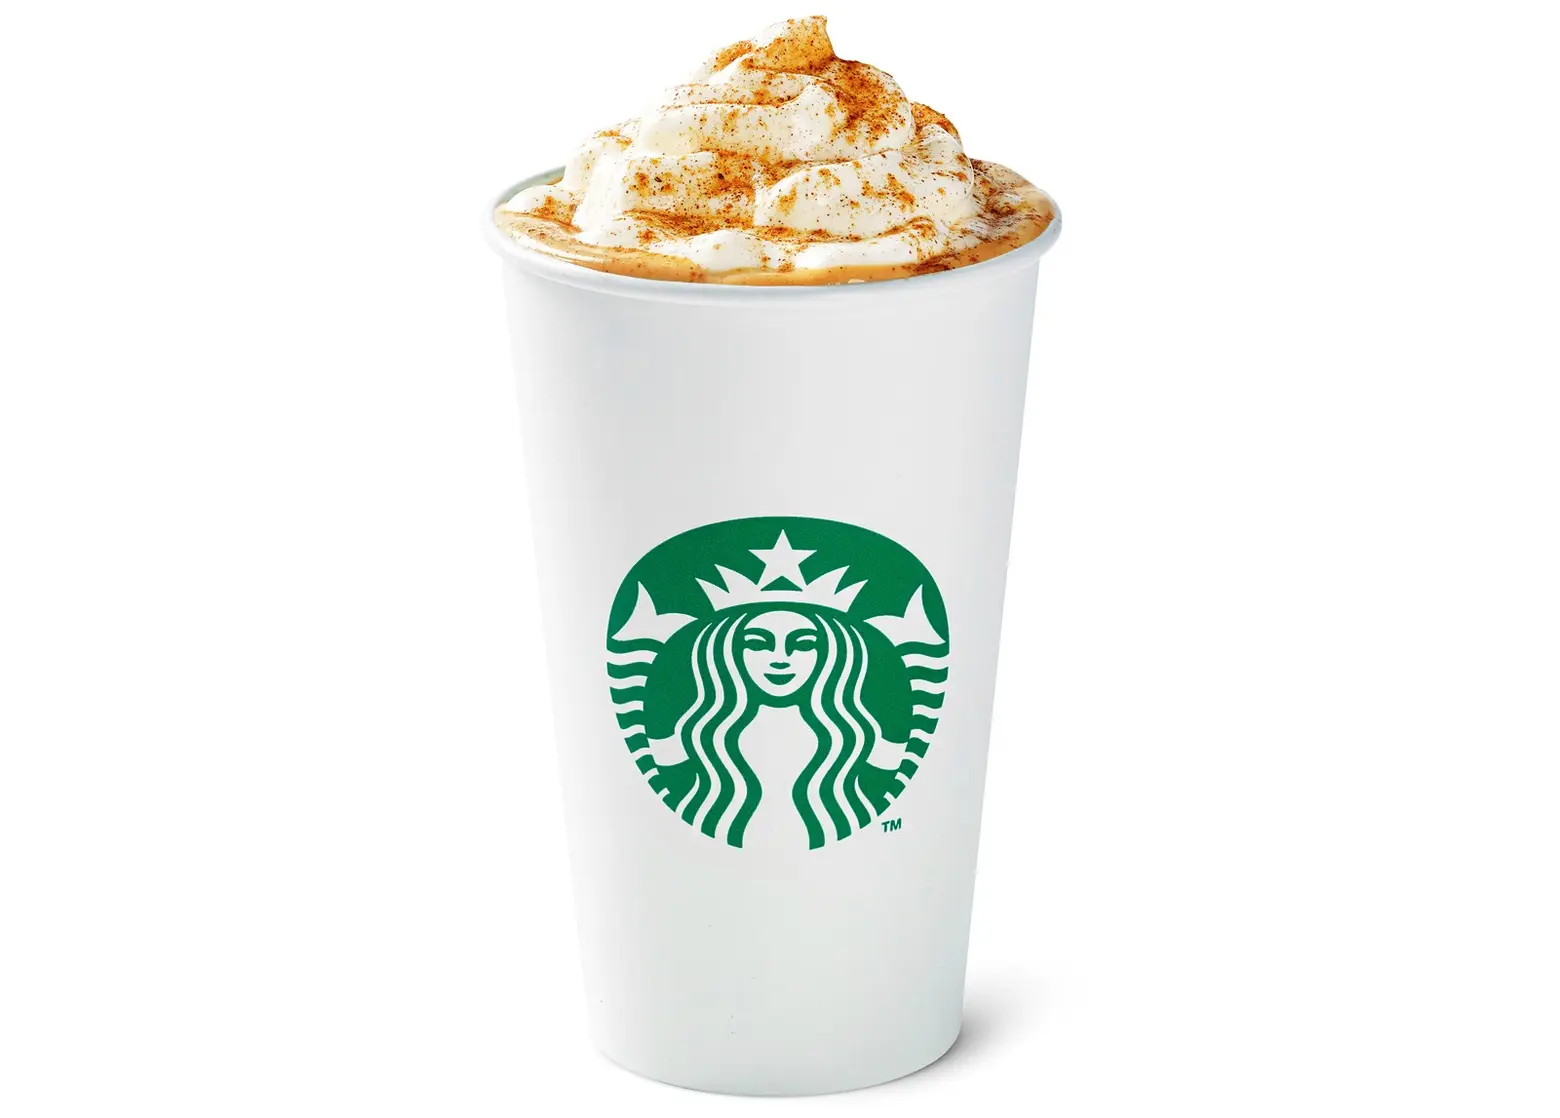 What’s Really in That Pumpkin Spice Latte; NYC Lit Only by Stars